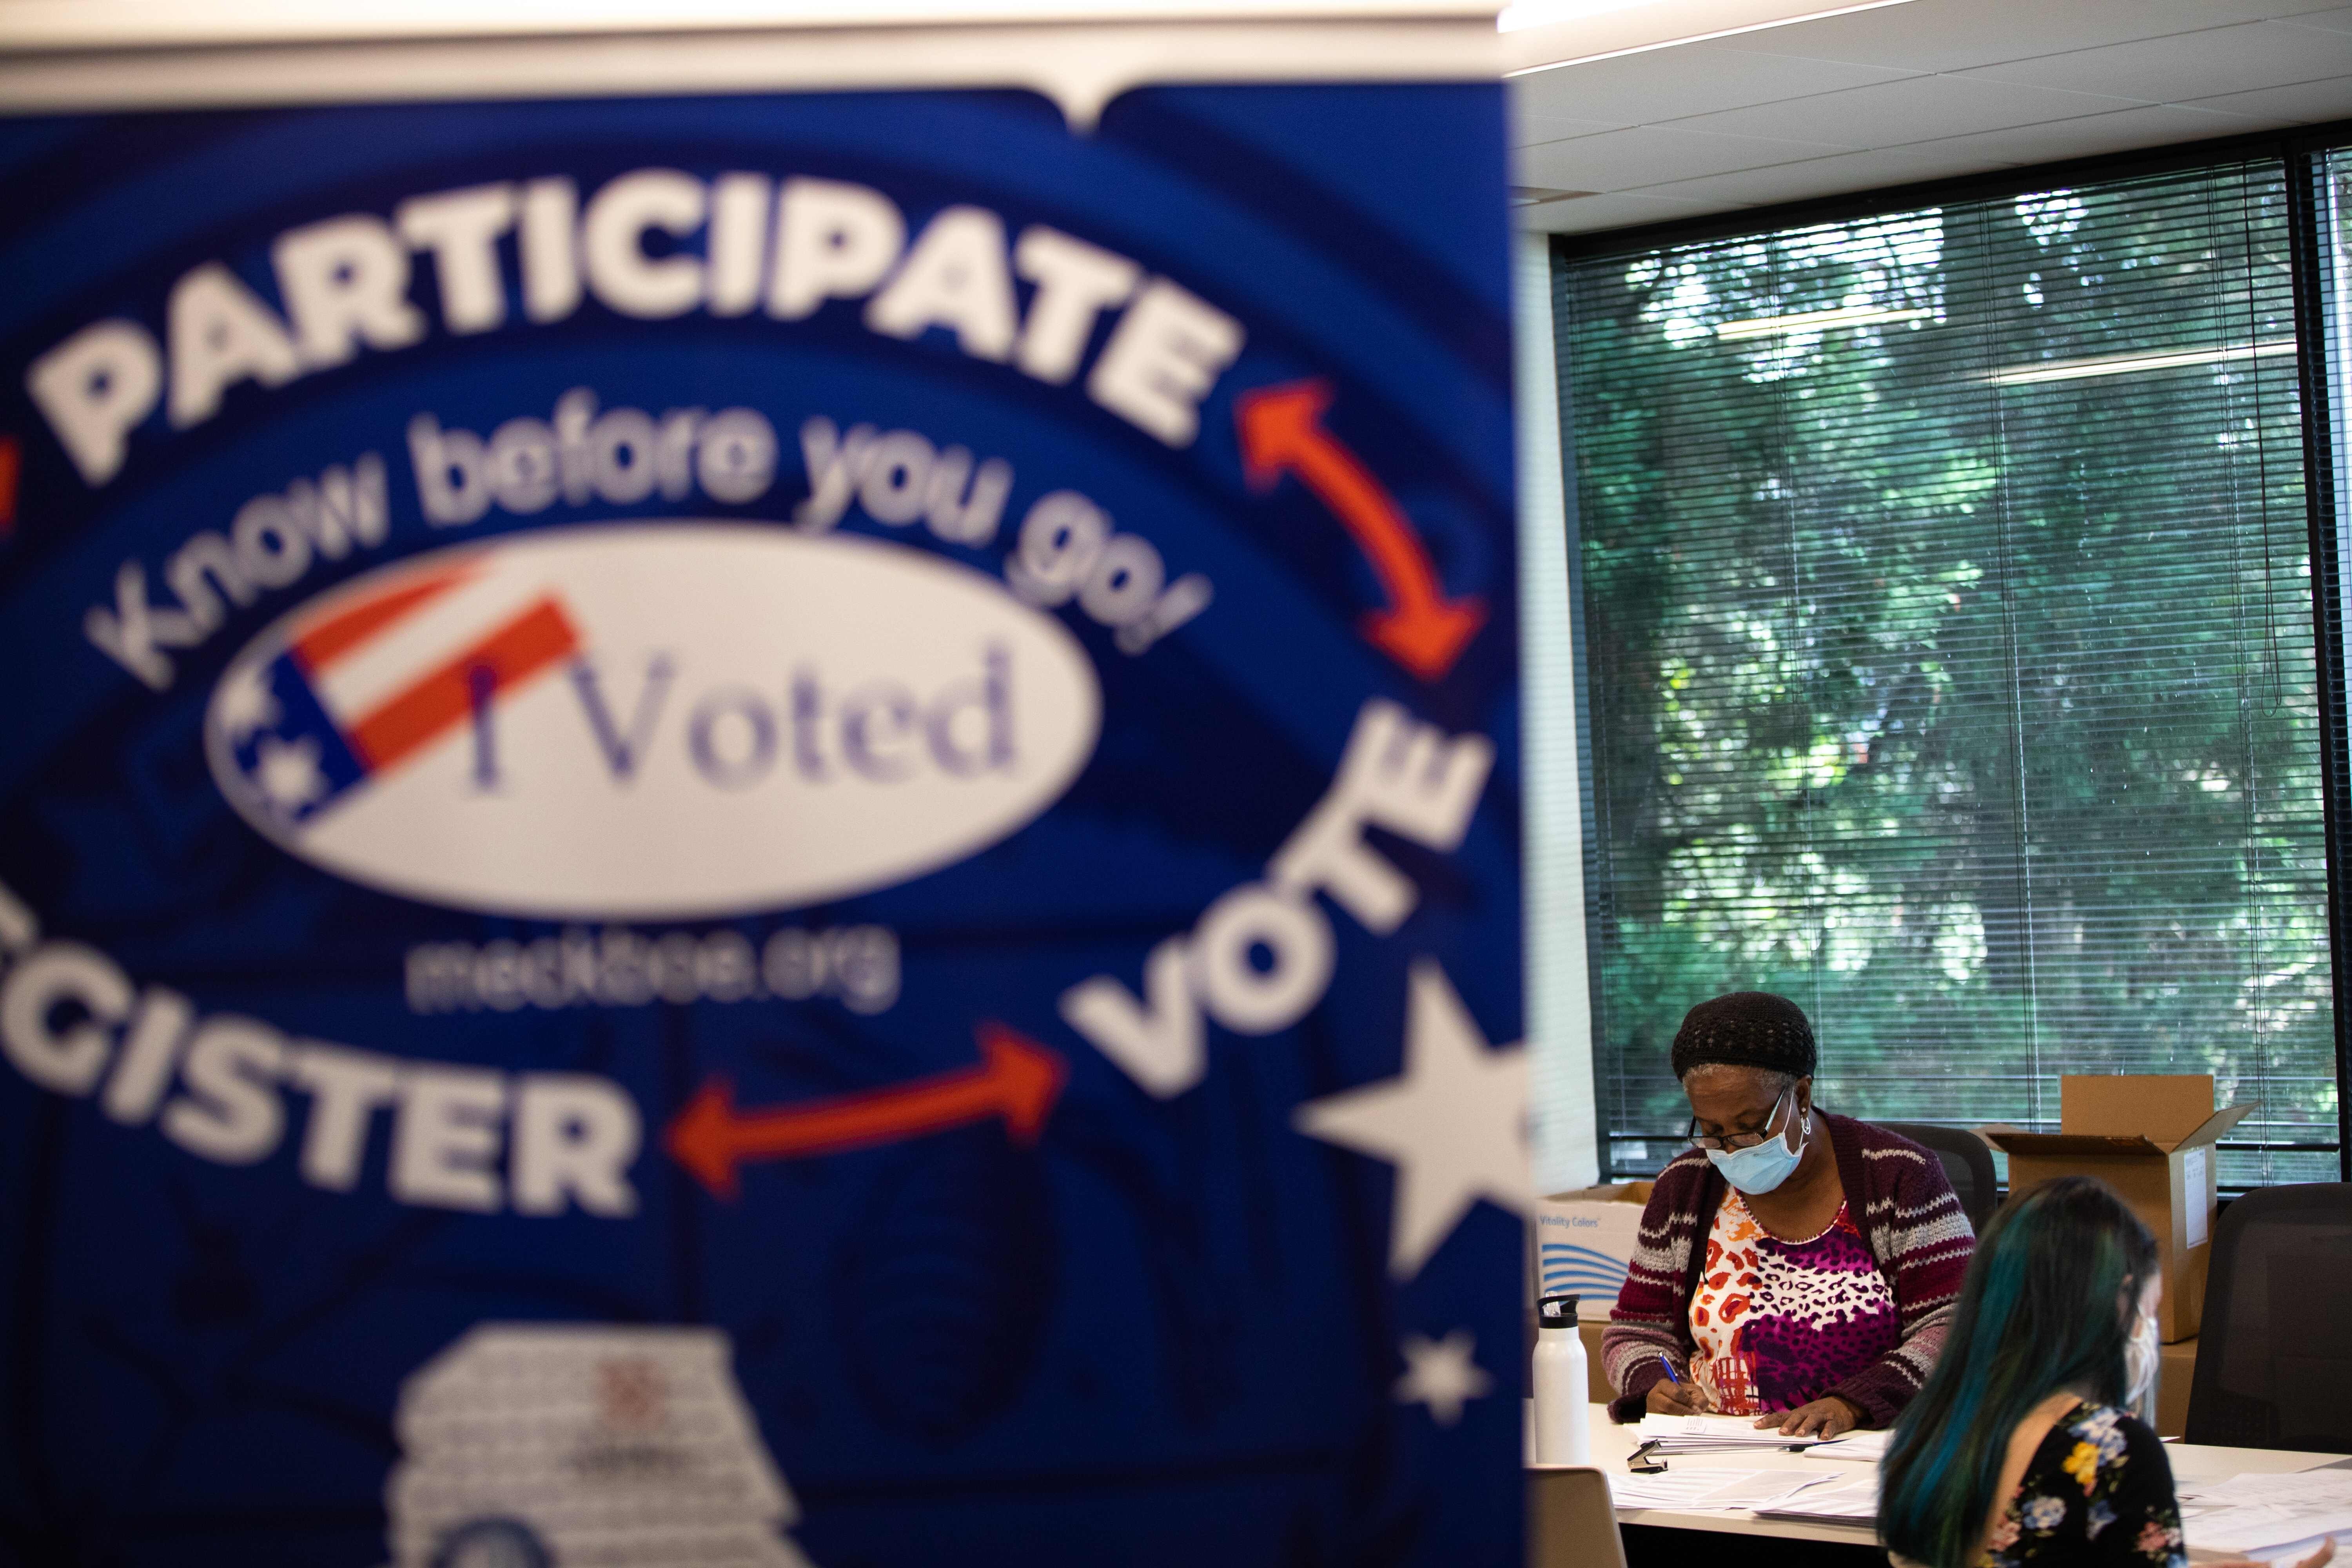 Postal vote election workers stuff applications at the Mecklenburg County Board of Elections office in Charlotte, North Carolina. Photo: AFP